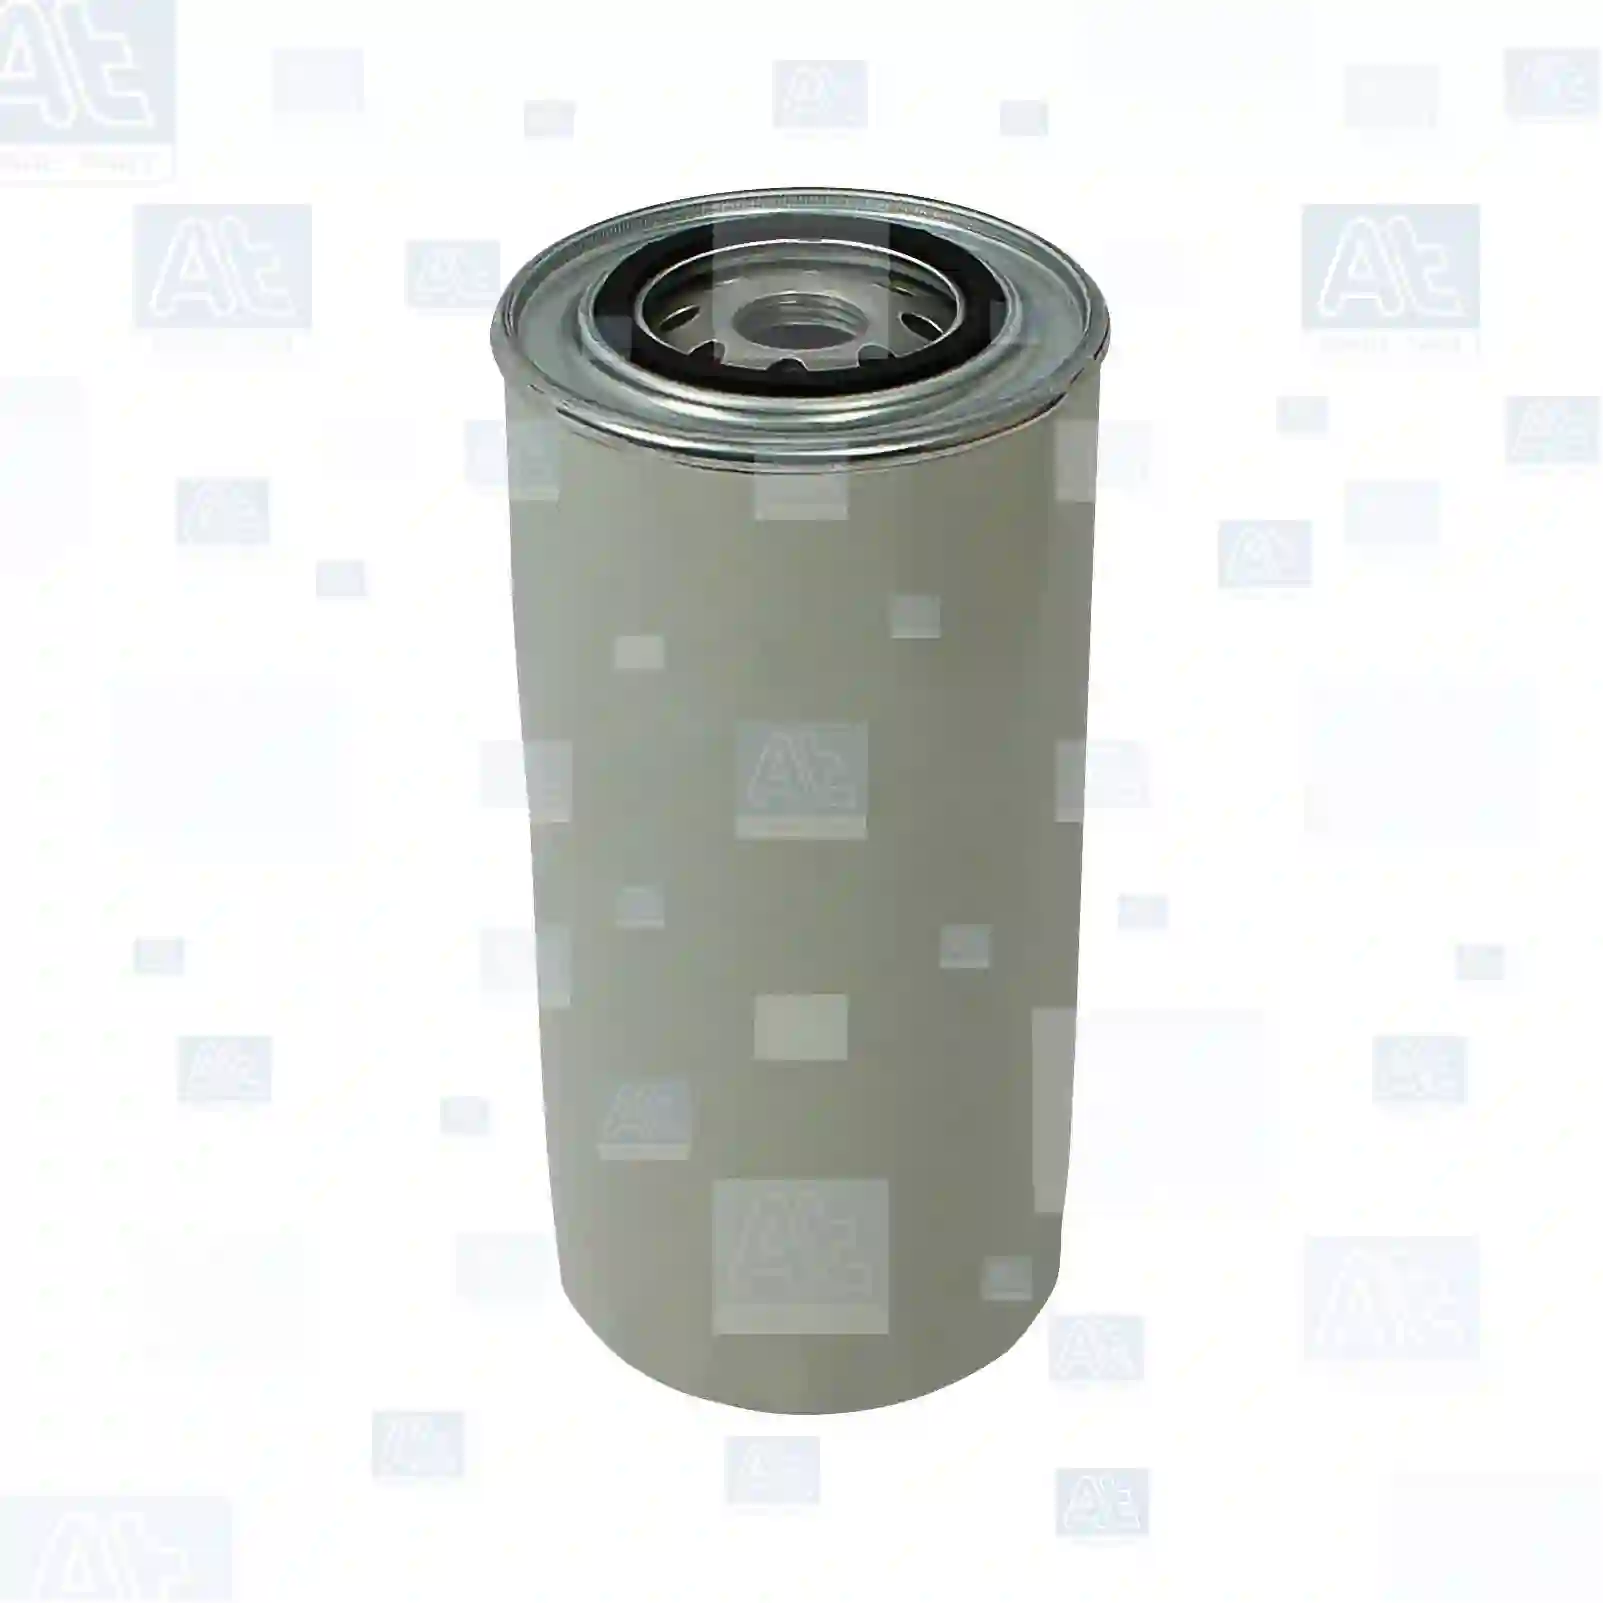 Oil filter, 77701589, 4667338, 4667339, 4667755, 8826586, 00048003, 01901604, 79026104, 01909137, 905411880011, 00048003, 00437072, 01836107, 01901604, 01907570, 01909137, 01930544, 04667338, 04667339, 08826586, 704667755, 71901604, 71909137, 74663338, 74667338, 74667339, 74667755, 78826586, 79026104, 437072, 5011420, ABPN10GLF3393, DNP551604, 7984920, 01901604, 01907570, 1901604, 1907570, 78826586, 01901604, 01909137, 04667338, 04667339, 04667755, 61589106, 79026104, 905411880011, 01930544, AMO42904, SE111B, SE111P, 5001846640, 6005019743, FD8320, ABU8533, SH8149, 808420, 80842000, 3338079, 2TB115561, TAE115561, 11959335100 ||  77701589 At Spare Part | Engine, Accelerator Pedal, Camshaft, Connecting Rod, Crankcase, Crankshaft, Cylinder Head, Engine Suspension Mountings, Exhaust Manifold, Exhaust Gas Recirculation, Filter Kits, Flywheel Housing, General Overhaul Kits, Engine, Intake Manifold, Oil Cleaner, Oil Cooler, Oil Filter, Oil Pump, Oil Sump, Piston & Liner, Sensor & Switch, Timing Case, Turbocharger, Cooling System, Belt Tensioner, Coolant Filter, Coolant Pipe, Corrosion Prevention Agent, Drive, Expansion Tank, Fan, Intercooler, Monitors & Gauges, Radiator, Thermostat, V-Belt / Timing belt, Water Pump, Fuel System, Electronical Injector Unit, Feed Pump, Fuel Filter, cpl., Fuel Gauge Sender,  Fuel Line, Fuel Pump, Fuel Tank, Injection Line Kit, Injection Pump, Exhaust System, Clutch & Pedal, Gearbox, Propeller Shaft, Axles, Brake System, Hubs & Wheels, Suspension, Leaf Spring, Universal Parts / Accessories, Steering, Electrical System, Cabin Oil filter, 77701589, 4667338, 4667339, 4667755, 8826586, 00048003, 01901604, 79026104, 01909137, 905411880011, 00048003, 00437072, 01836107, 01901604, 01907570, 01909137, 01930544, 04667338, 04667339, 08826586, 704667755, 71901604, 71909137, 74663338, 74667338, 74667339, 74667755, 78826586, 79026104, 437072, 5011420, ABPN10GLF3393, DNP551604, 7984920, 01901604, 01907570, 1901604, 1907570, 78826586, 01901604, 01909137, 04667338, 04667339, 04667755, 61589106, 79026104, 905411880011, 01930544, AMO42904, SE111B, SE111P, 5001846640, 6005019743, FD8320, ABU8533, SH8149, 808420, 80842000, 3338079, 2TB115561, TAE115561, 11959335100 ||  77701589 At Spare Part | Engine, Accelerator Pedal, Camshaft, Connecting Rod, Crankcase, Crankshaft, Cylinder Head, Engine Suspension Mountings, Exhaust Manifold, Exhaust Gas Recirculation, Filter Kits, Flywheel Housing, General Overhaul Kits, Engine, Intake Manifold, Oil Cleaner, Oil Cooler, Oil Filter, Oil Pump, Oil Sump, Piston & Liner, Sensor & Switch, Timing Case, Turbocharger, Cooling System, Belt Tensioner, Coolant Filter, Coolant Pipe, Corrosion Prevention Agent, Drive, Expansion Tank, Fan, Intercooler, Monitors & Gauges, Radiator, Thermostat, V-Belt / Timing belt, Water Pump, Fuel System, Electronical Injector Unit, Feed Pump, Fuel Filter, cpl., Fuel Gauge Sender,  Fuel Line, Fuel Pump, Fuel Tank, Injection Line Kit, Injection Pump, Exhaust System, Clutch & Pedal, Gearbox, Propeller Shaft, Axles, Brake System, Hubs & Wheels, Suspension, Leaf Spring, Universal Parts / Accessories, Steering, Electrical System, Cabin